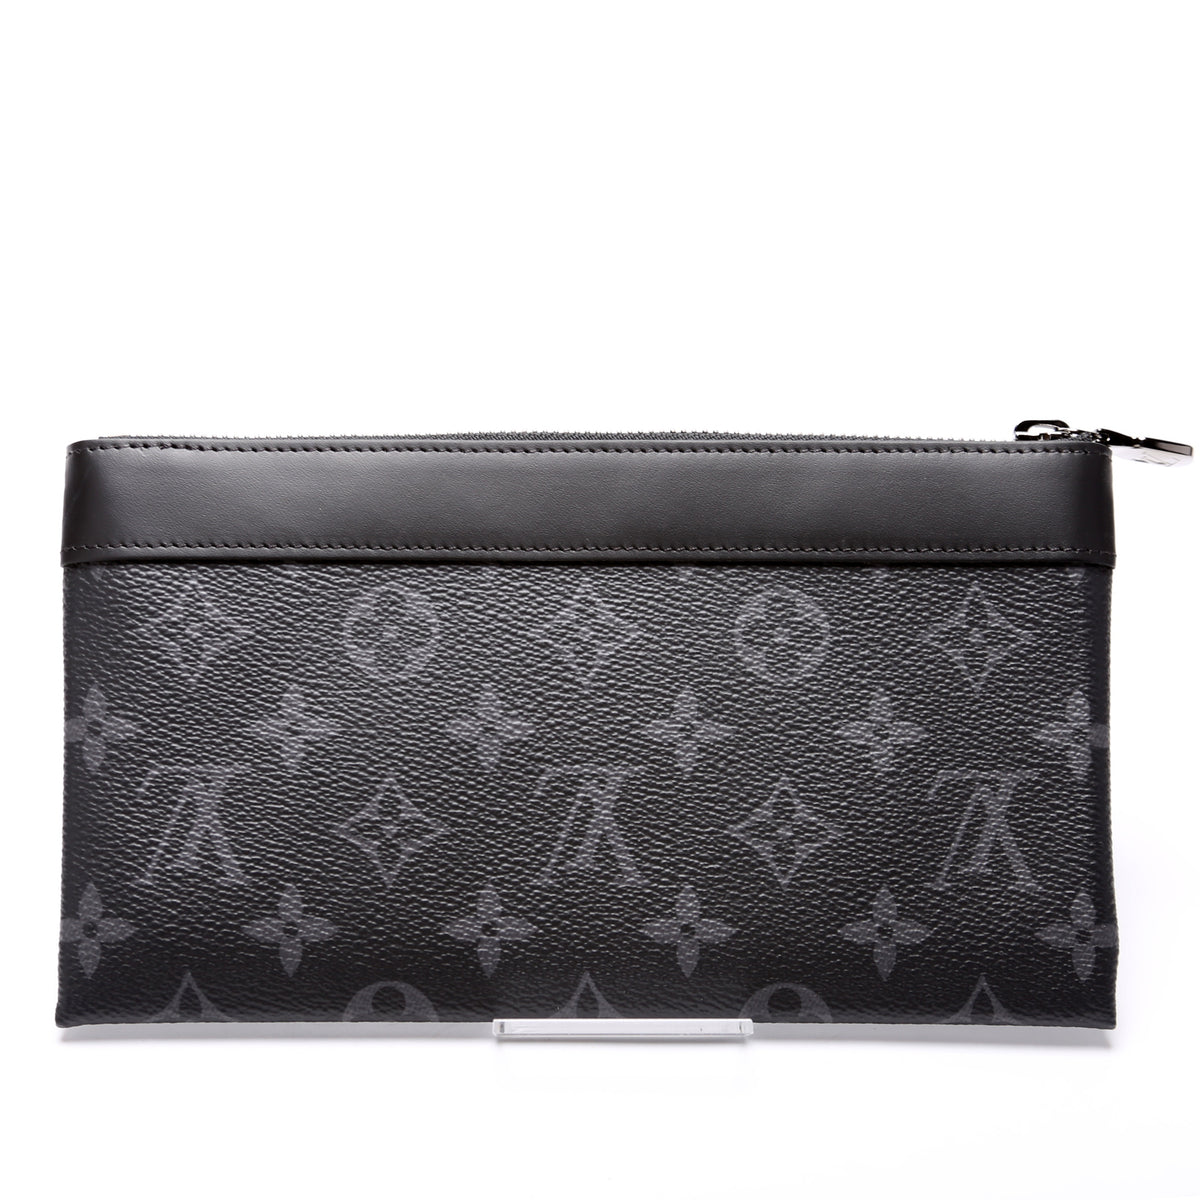 Authenticated Used LOUIS VUITTON Louis Vuitton Pochette Discovery